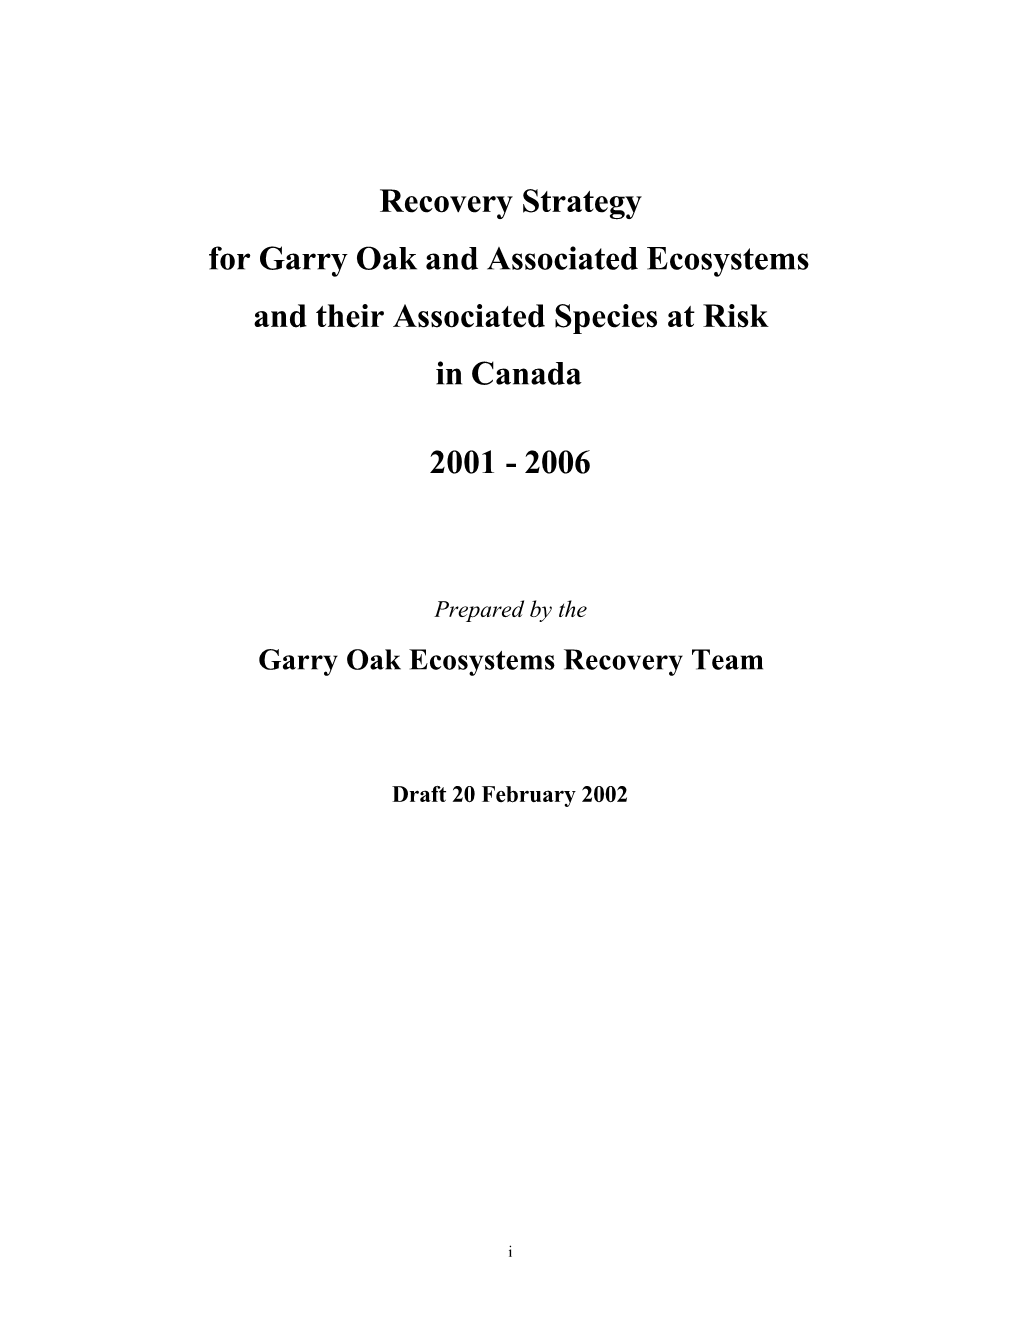 Recovery Strategy for Garry Oak and Associated Ecosystems and Their Associated Species at Risk in Canada